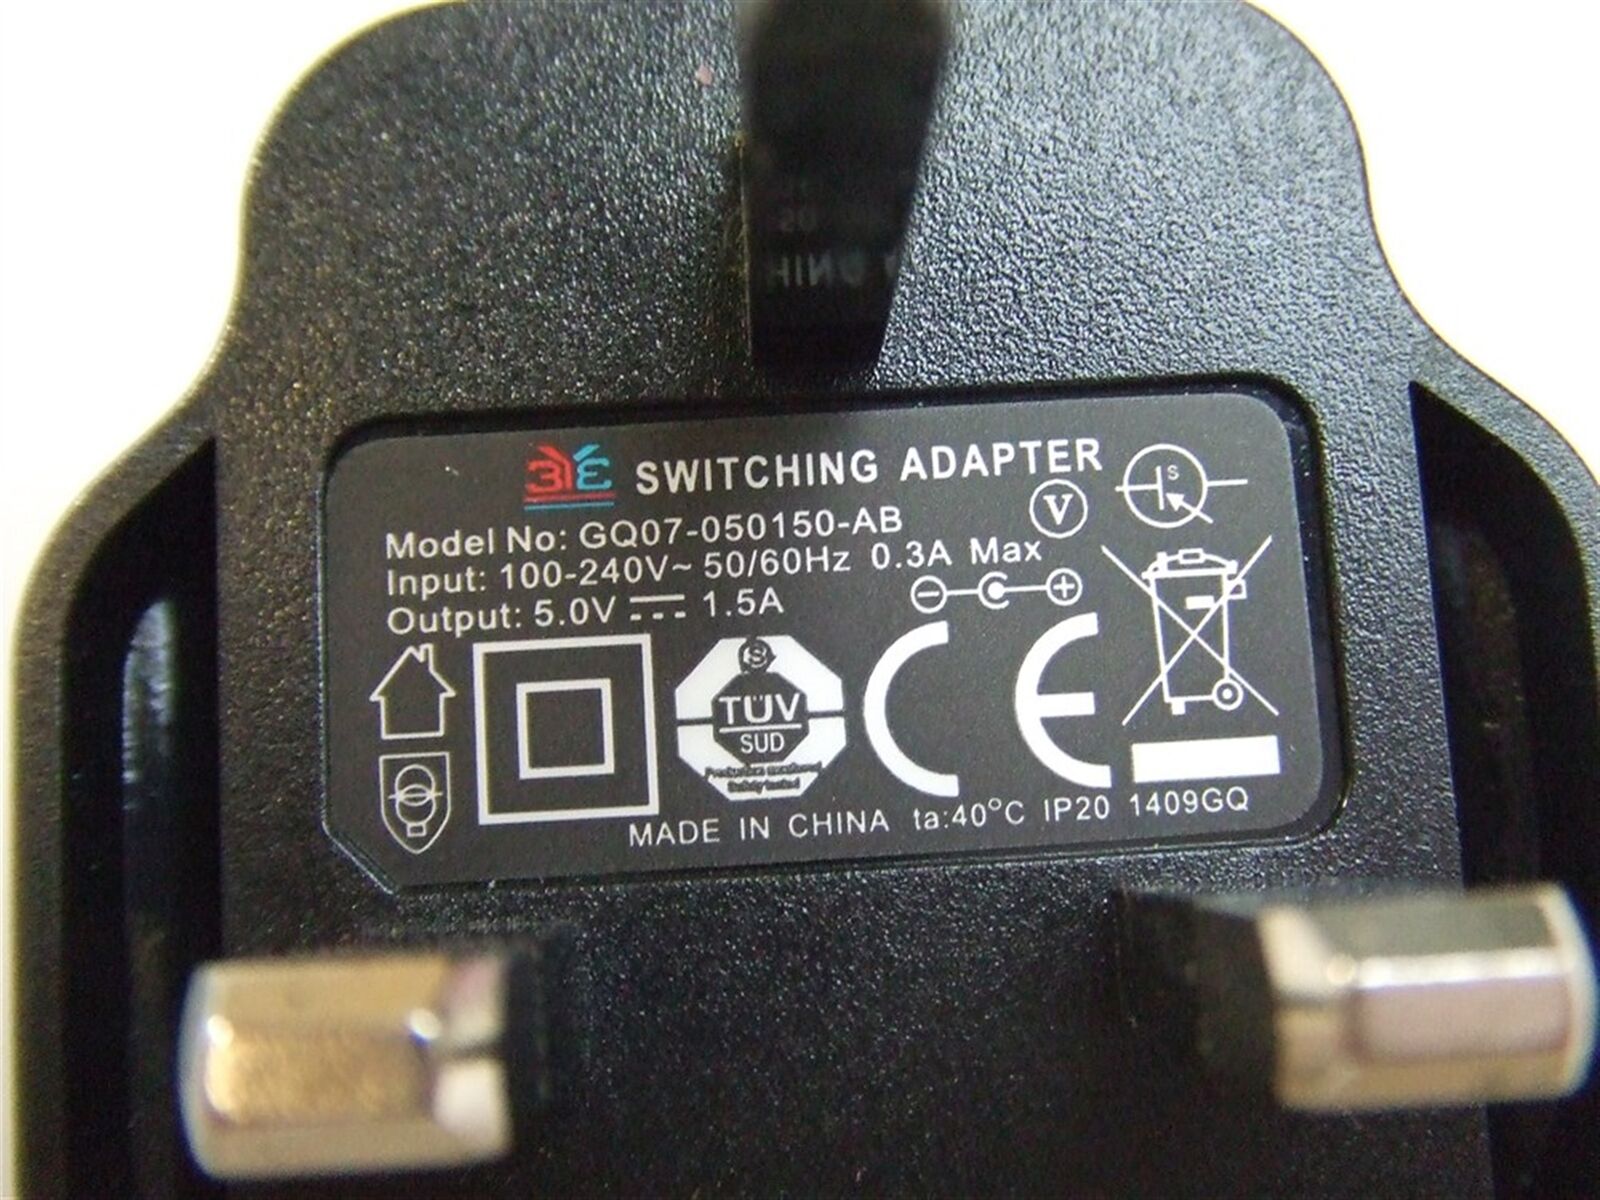 New 3YE GQ07-050150-AB Power Supply 5V 1.5A AC Adapter for Bush CSPK258WWI Dock - Click Image to Close